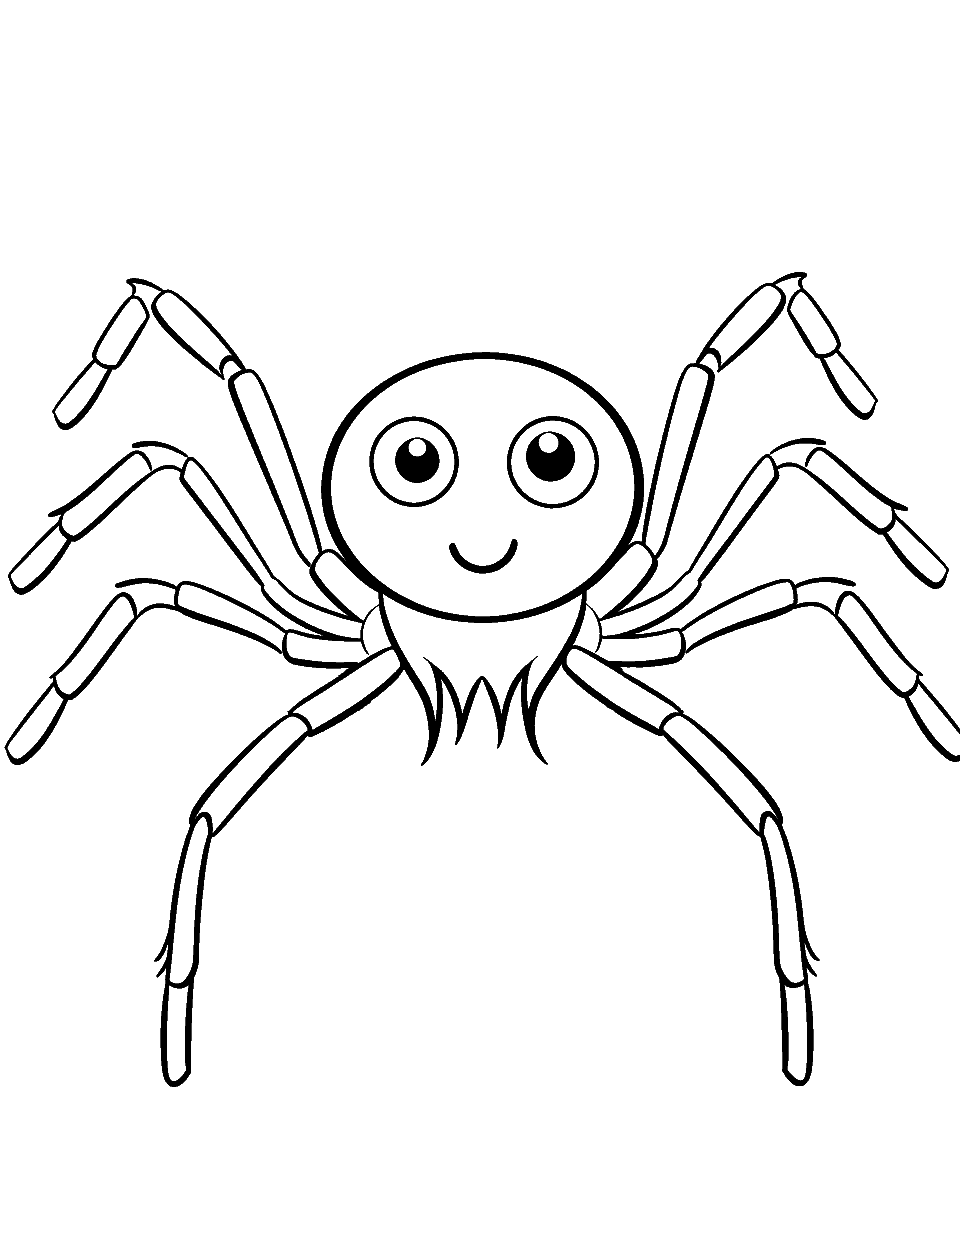 Big Friendly Spider Coloring Page - A large, friendly-looking spider with a warm smile.